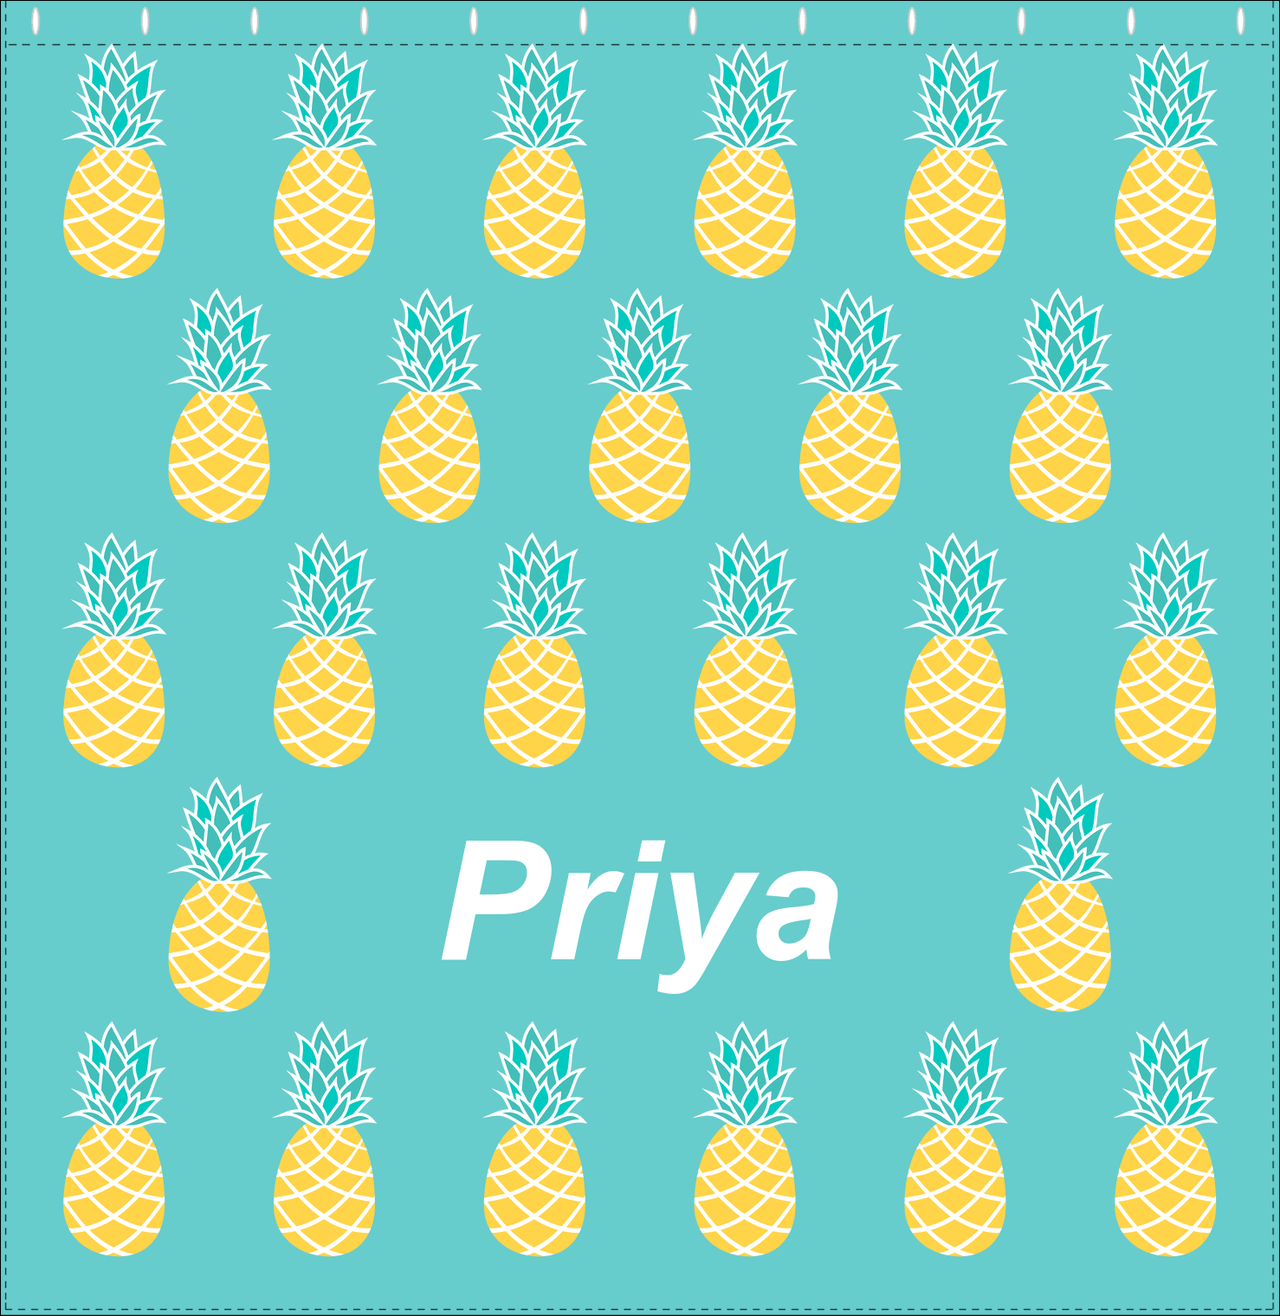 Personalized Pineapple Shower Curtain - Many Pineapples III - Decorate View